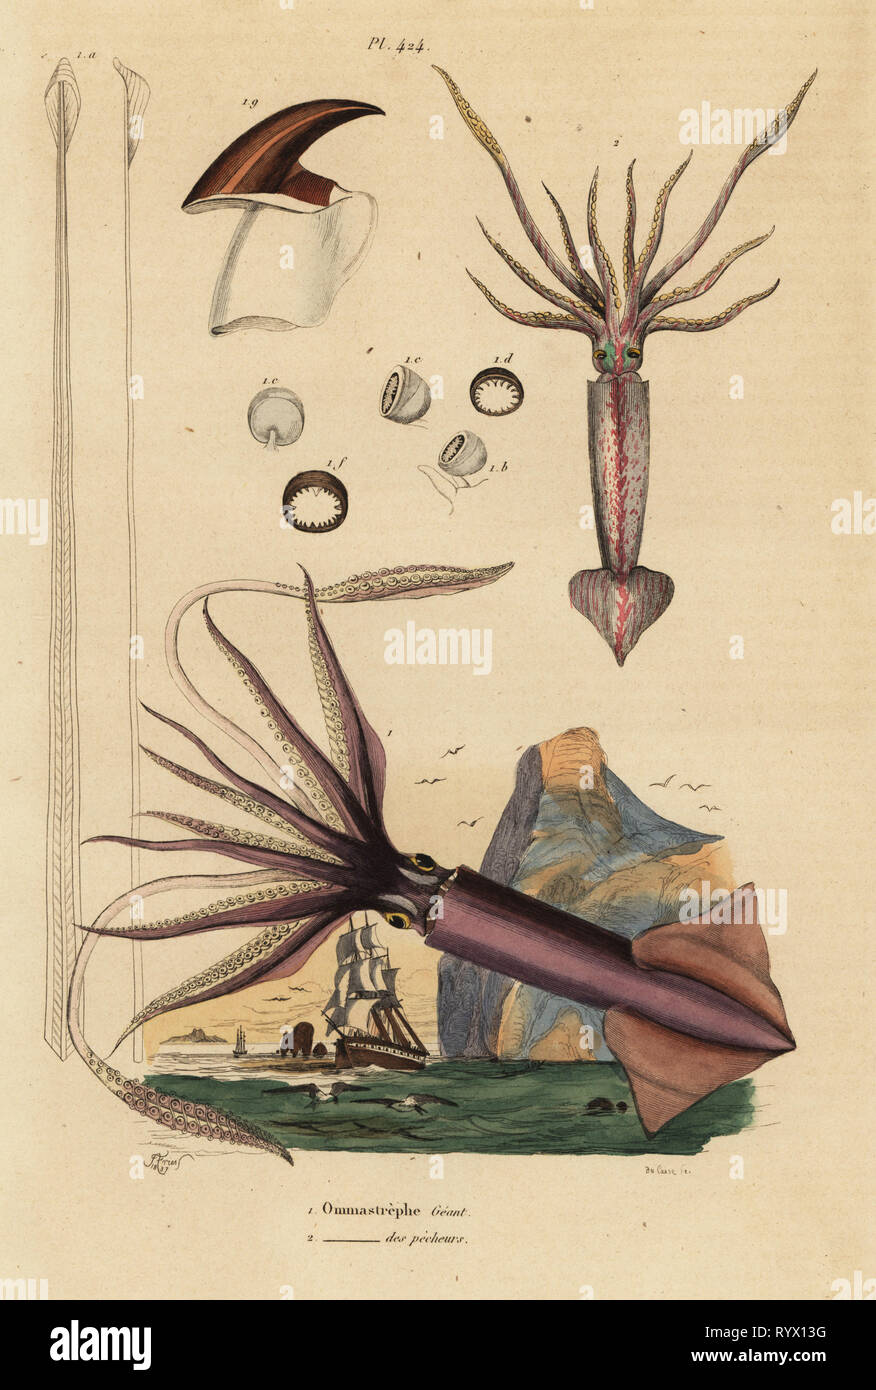 Humboldt squid, Dosidicus gigas 1, and European flying squid, Todarodes sagittatus 2. Ommastrephe geant, Ommastrephe des pecheurs. Handcoloured steel engraving by du Casse after an illustration by Adolph Fries from Felix-Edouard Guerin-Meneville's Dictionnaire Pittoresque d'Histoire Naturelle (Picturesque Dictionary of Natural History), Paris, 1834-39. Stock Photo